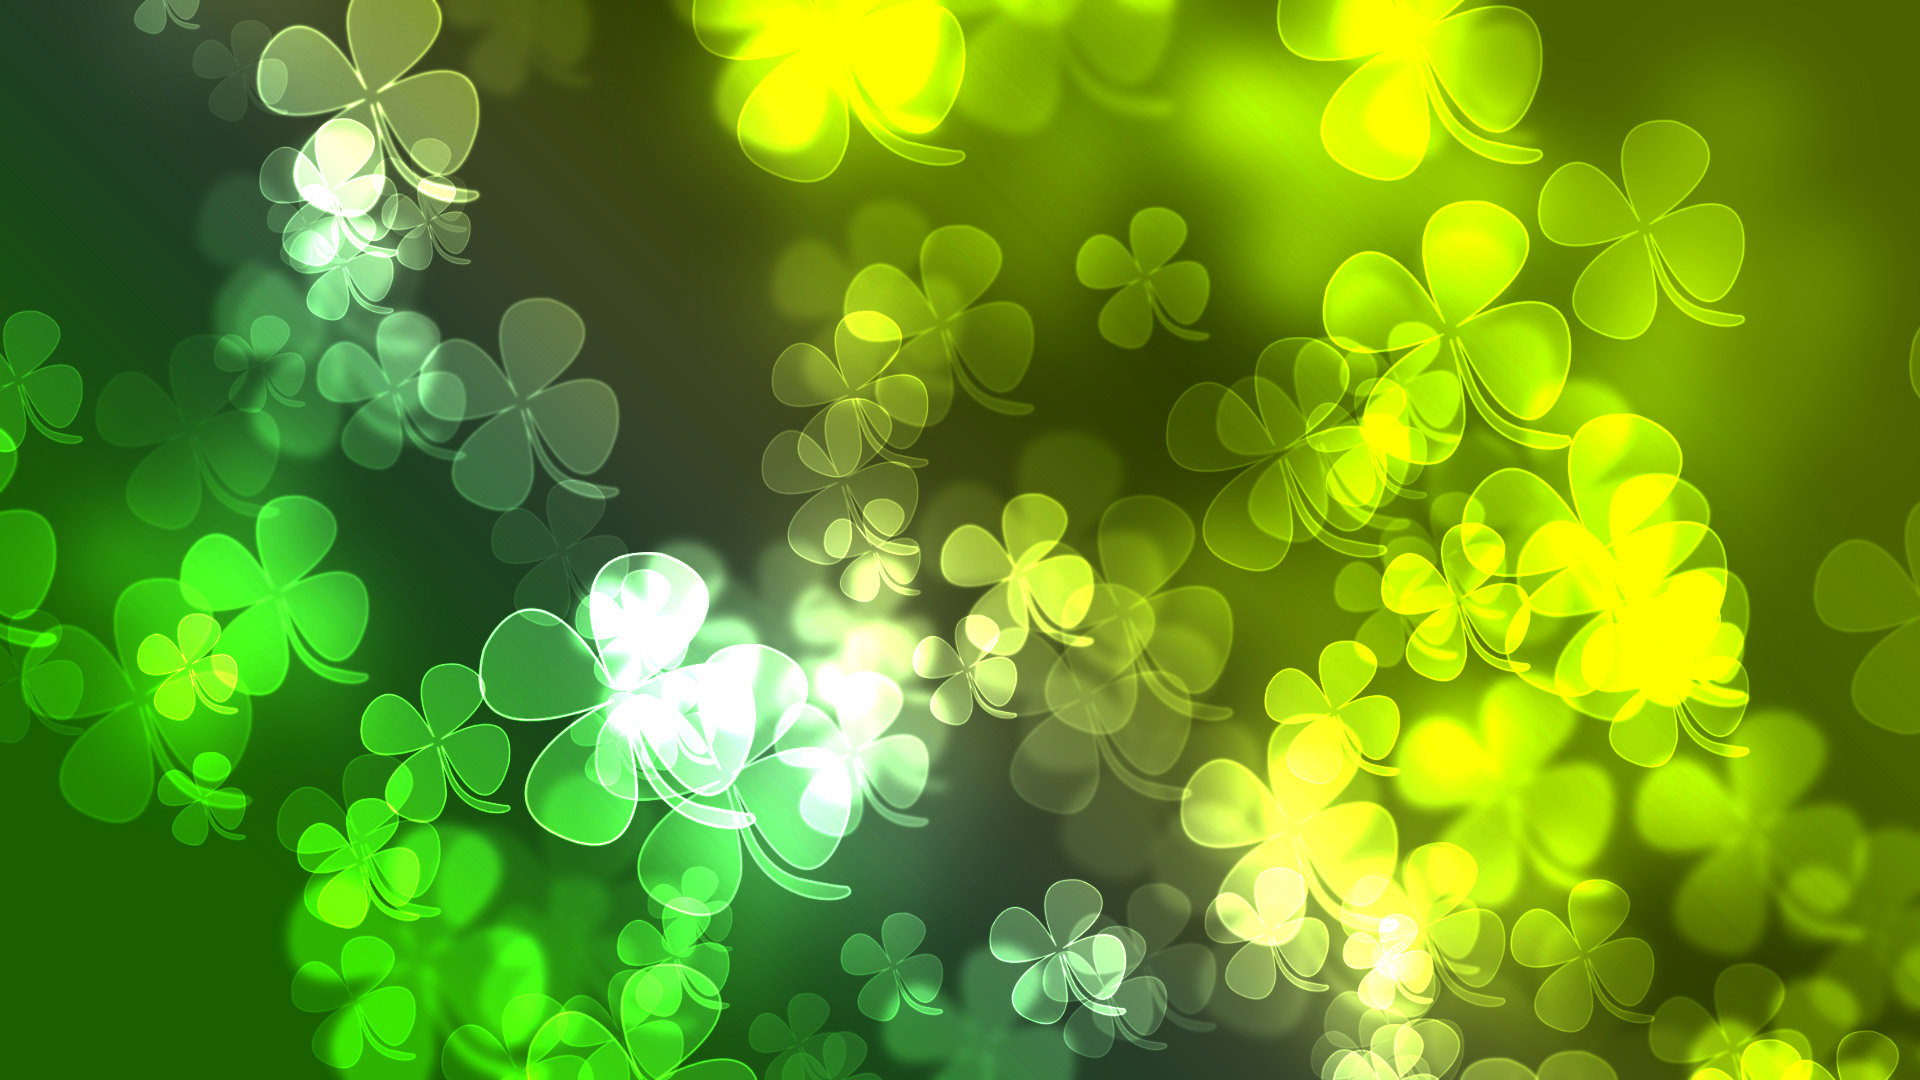 pleasant wallpapers for mobile,green,leaf,light,yellow,pattern